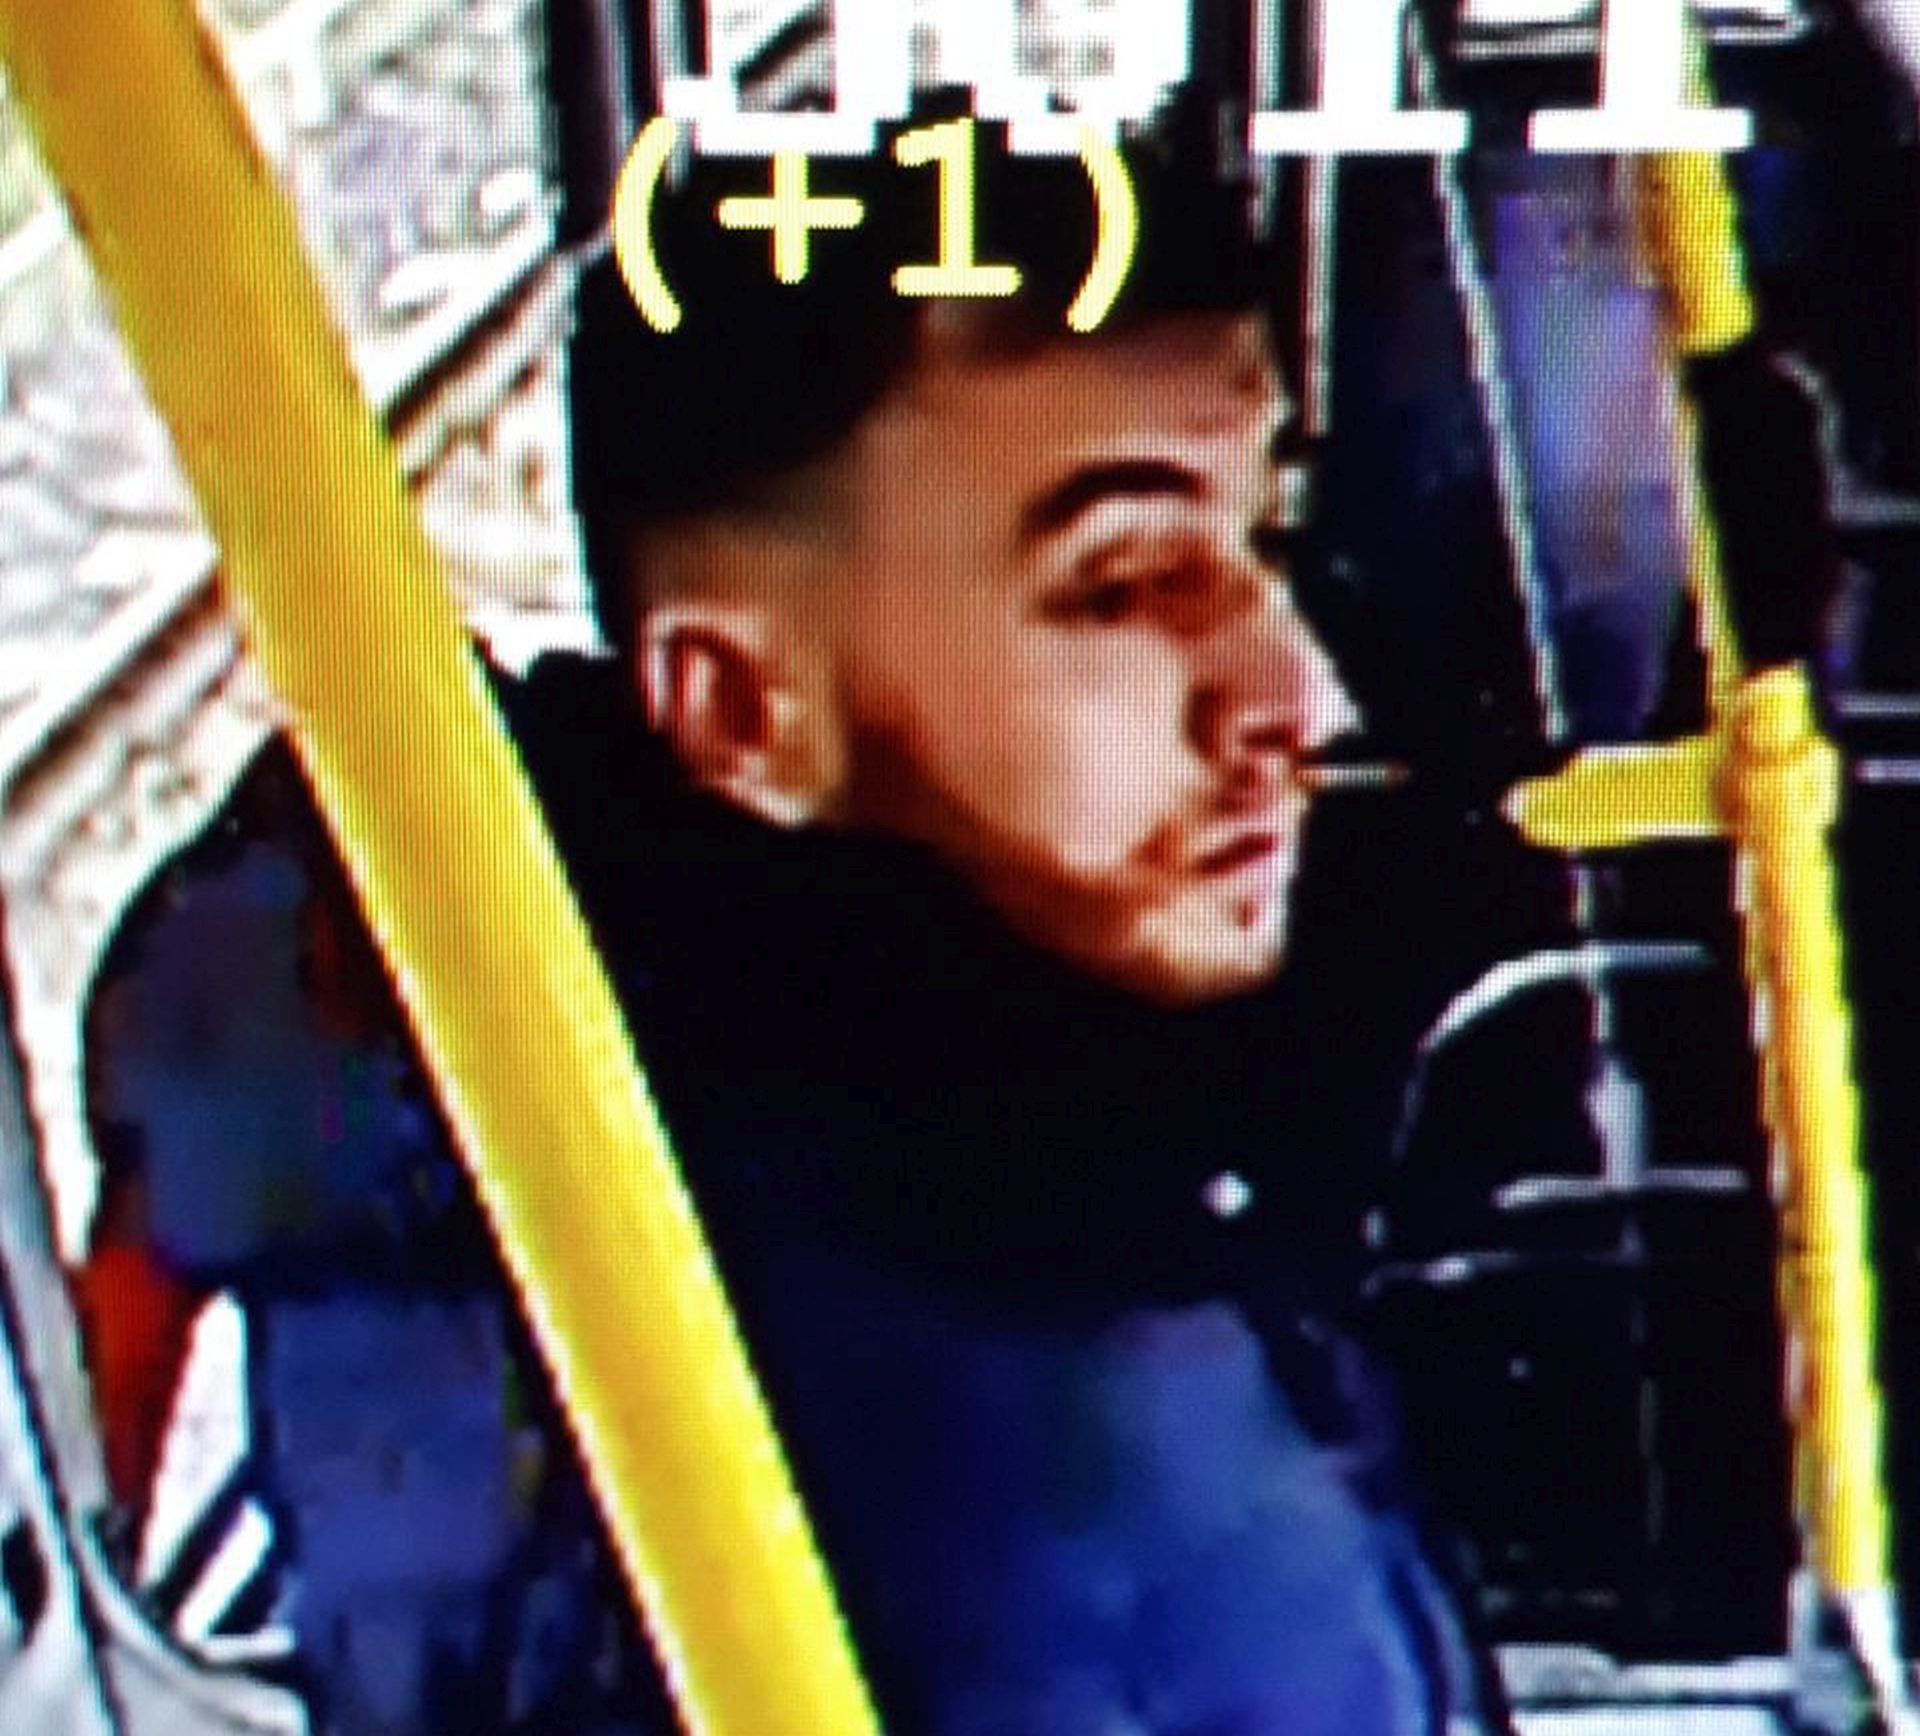 epa07446764 A handout photo made available by the Utrecht Police shows a man identified by the police as Gokmen Tanis, a 37-years old Turkish-born male, on 18 March 2019. Gokmen Tanis is being sought in connection to the shooting on a tram in Utrecht earlier on 18 March 2019. According to the the Dutch Police, several people have been injured in a shooting on a tram in the central Dutch city of Utrecht. The perpetrator is still at large.  EPA/POLITIE UTRECHT HANDOUT  HANDOUT EDITORIAL USE ONLY/NO SALES